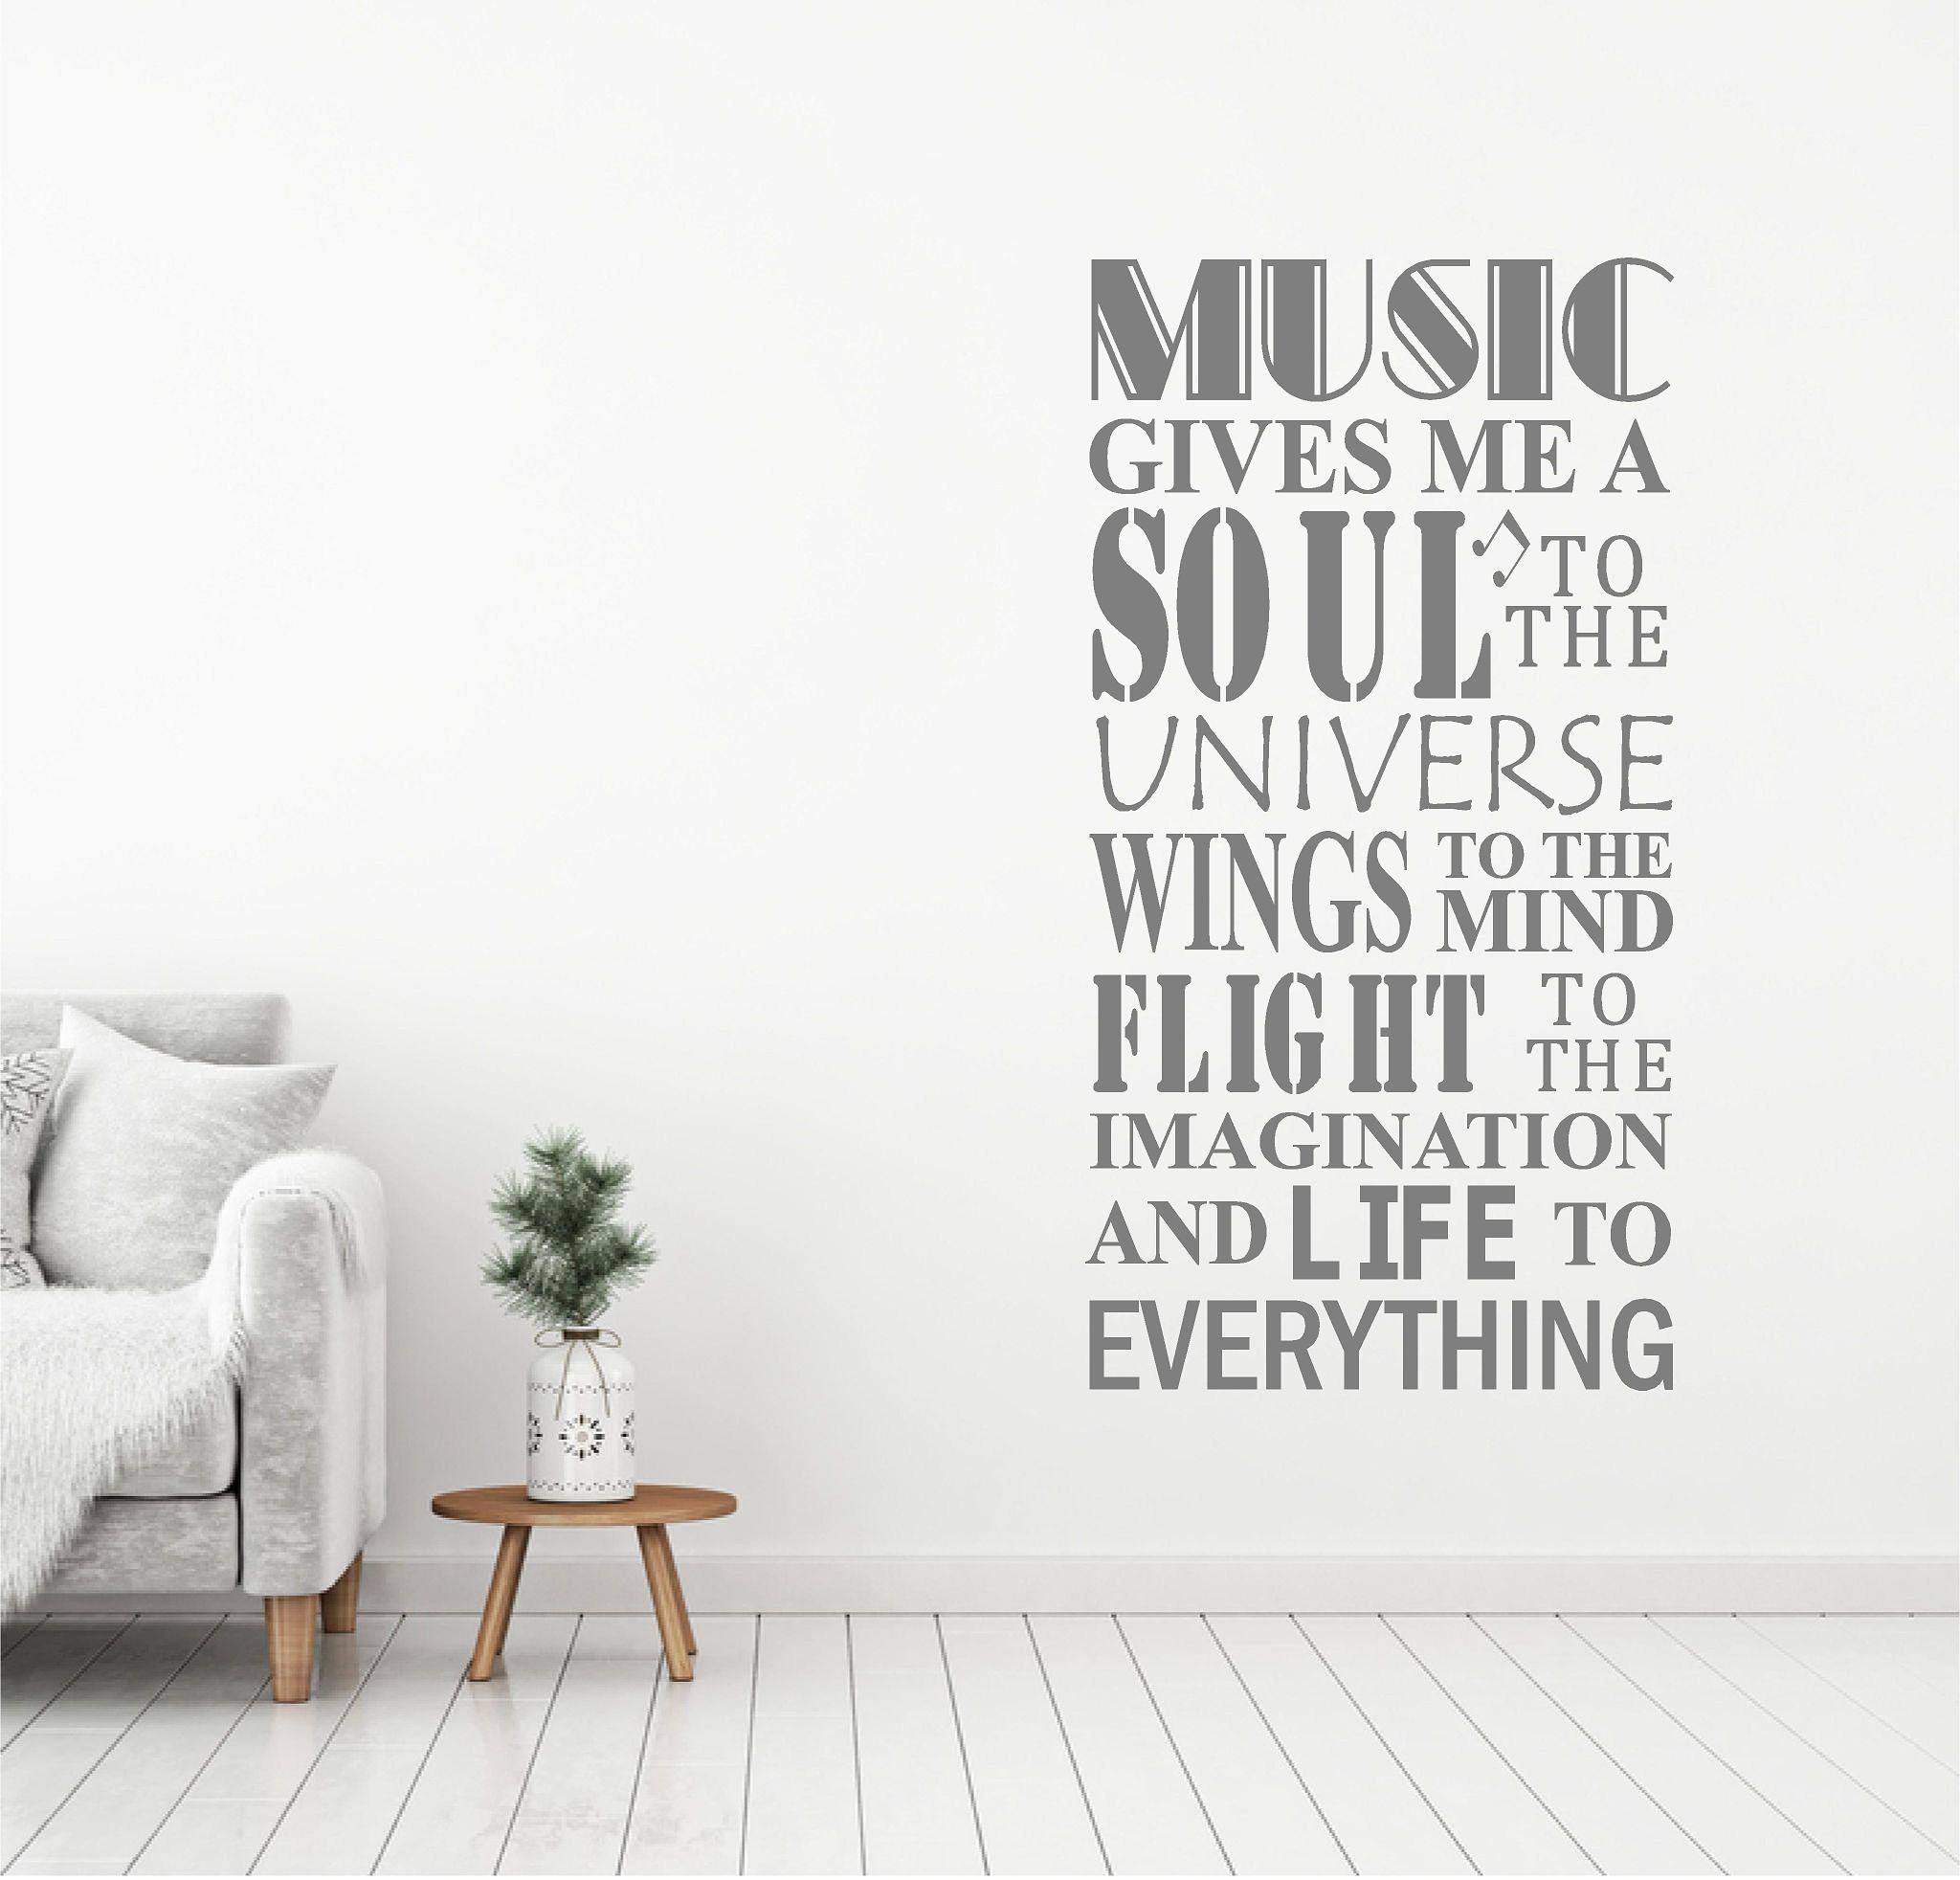 Music gives me a soul.